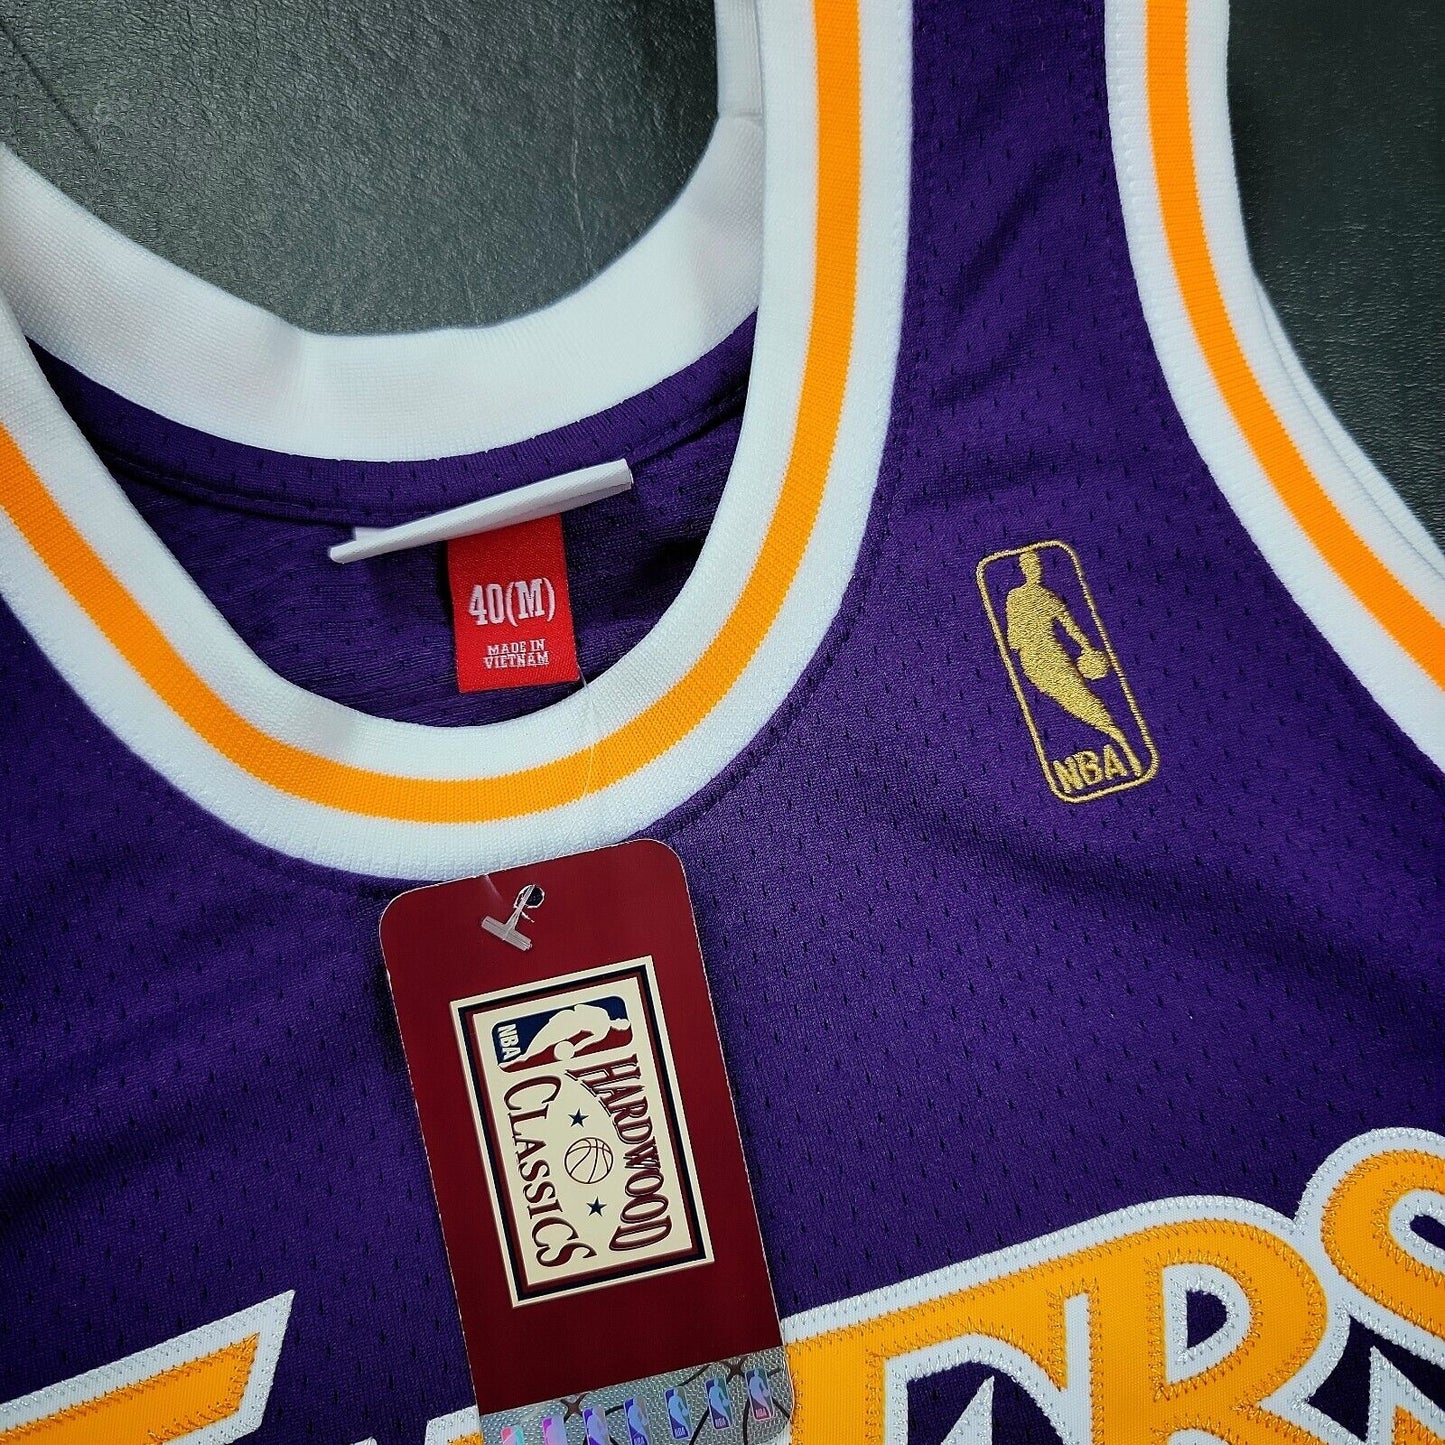 100% Authentic Kobe Bryant Mitchell Ness 96 97 Rookie Lakers Jersey Size 40 M